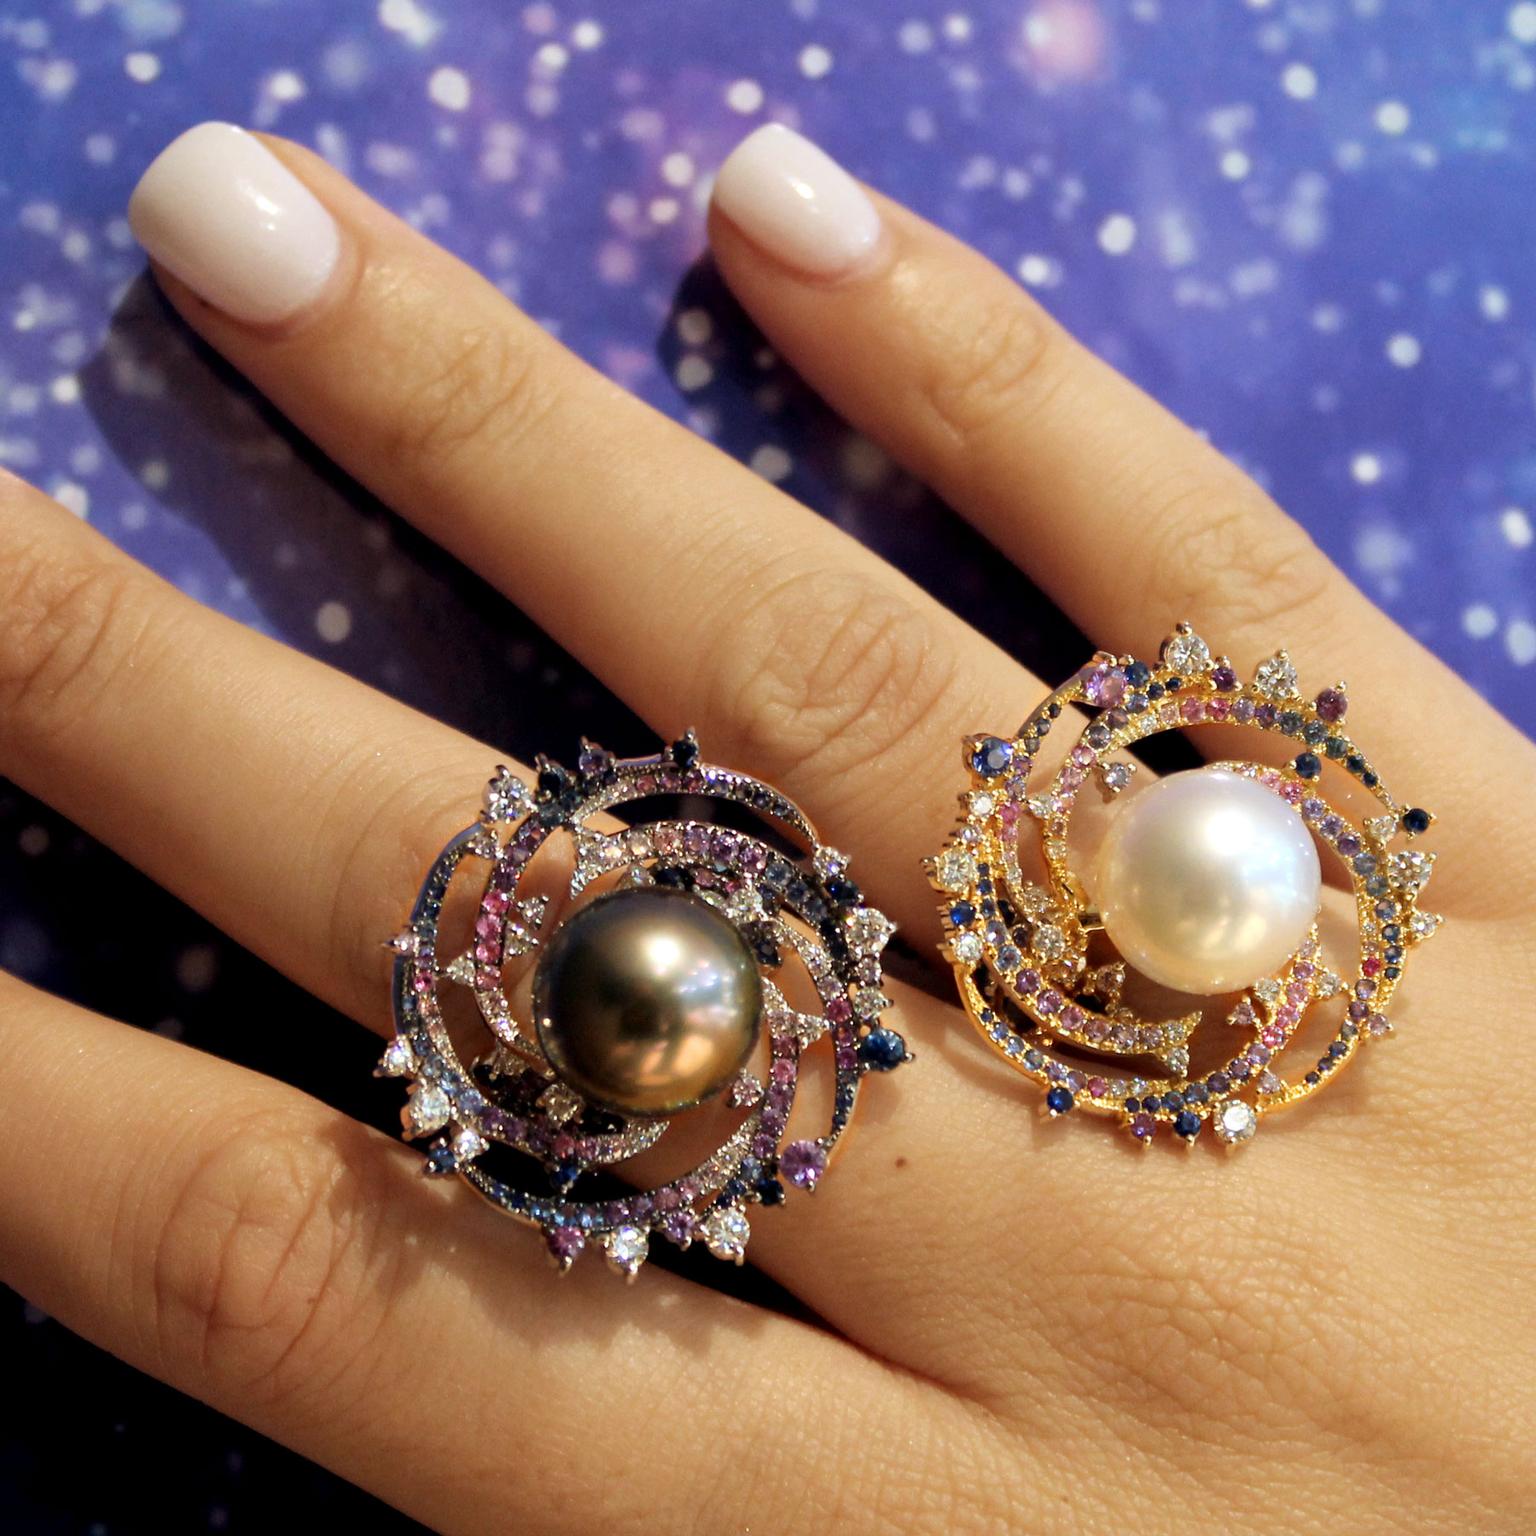 Autore Stardust collection pearl rings at Baselworld